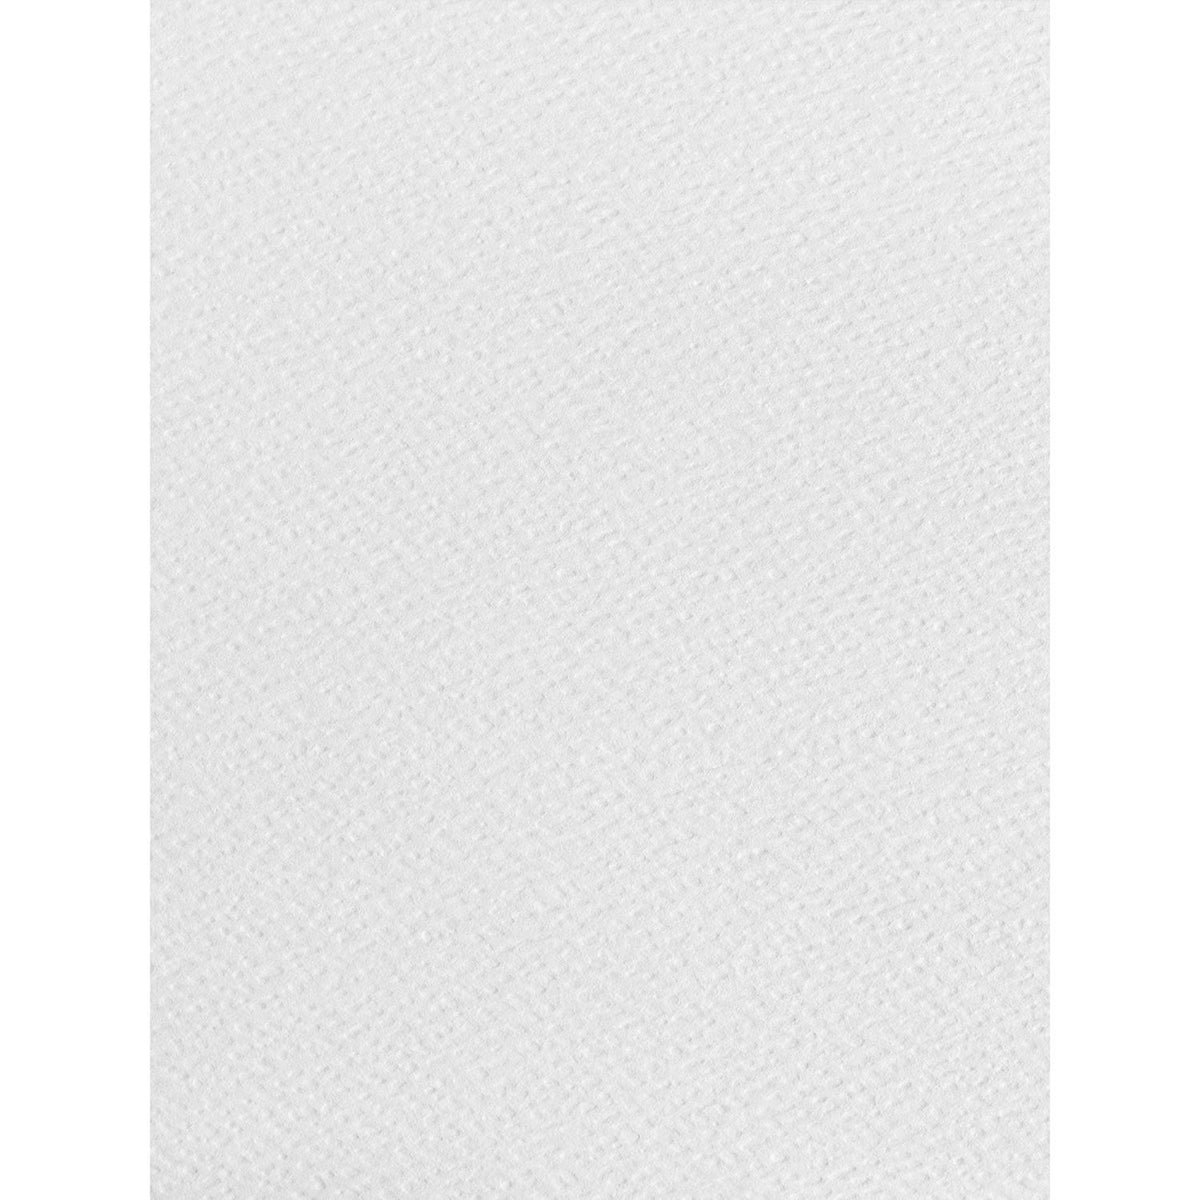 A4 Sheets White Hammered Paper Textured 120gsm Suitable for Inkjets and Laser Printers (100)